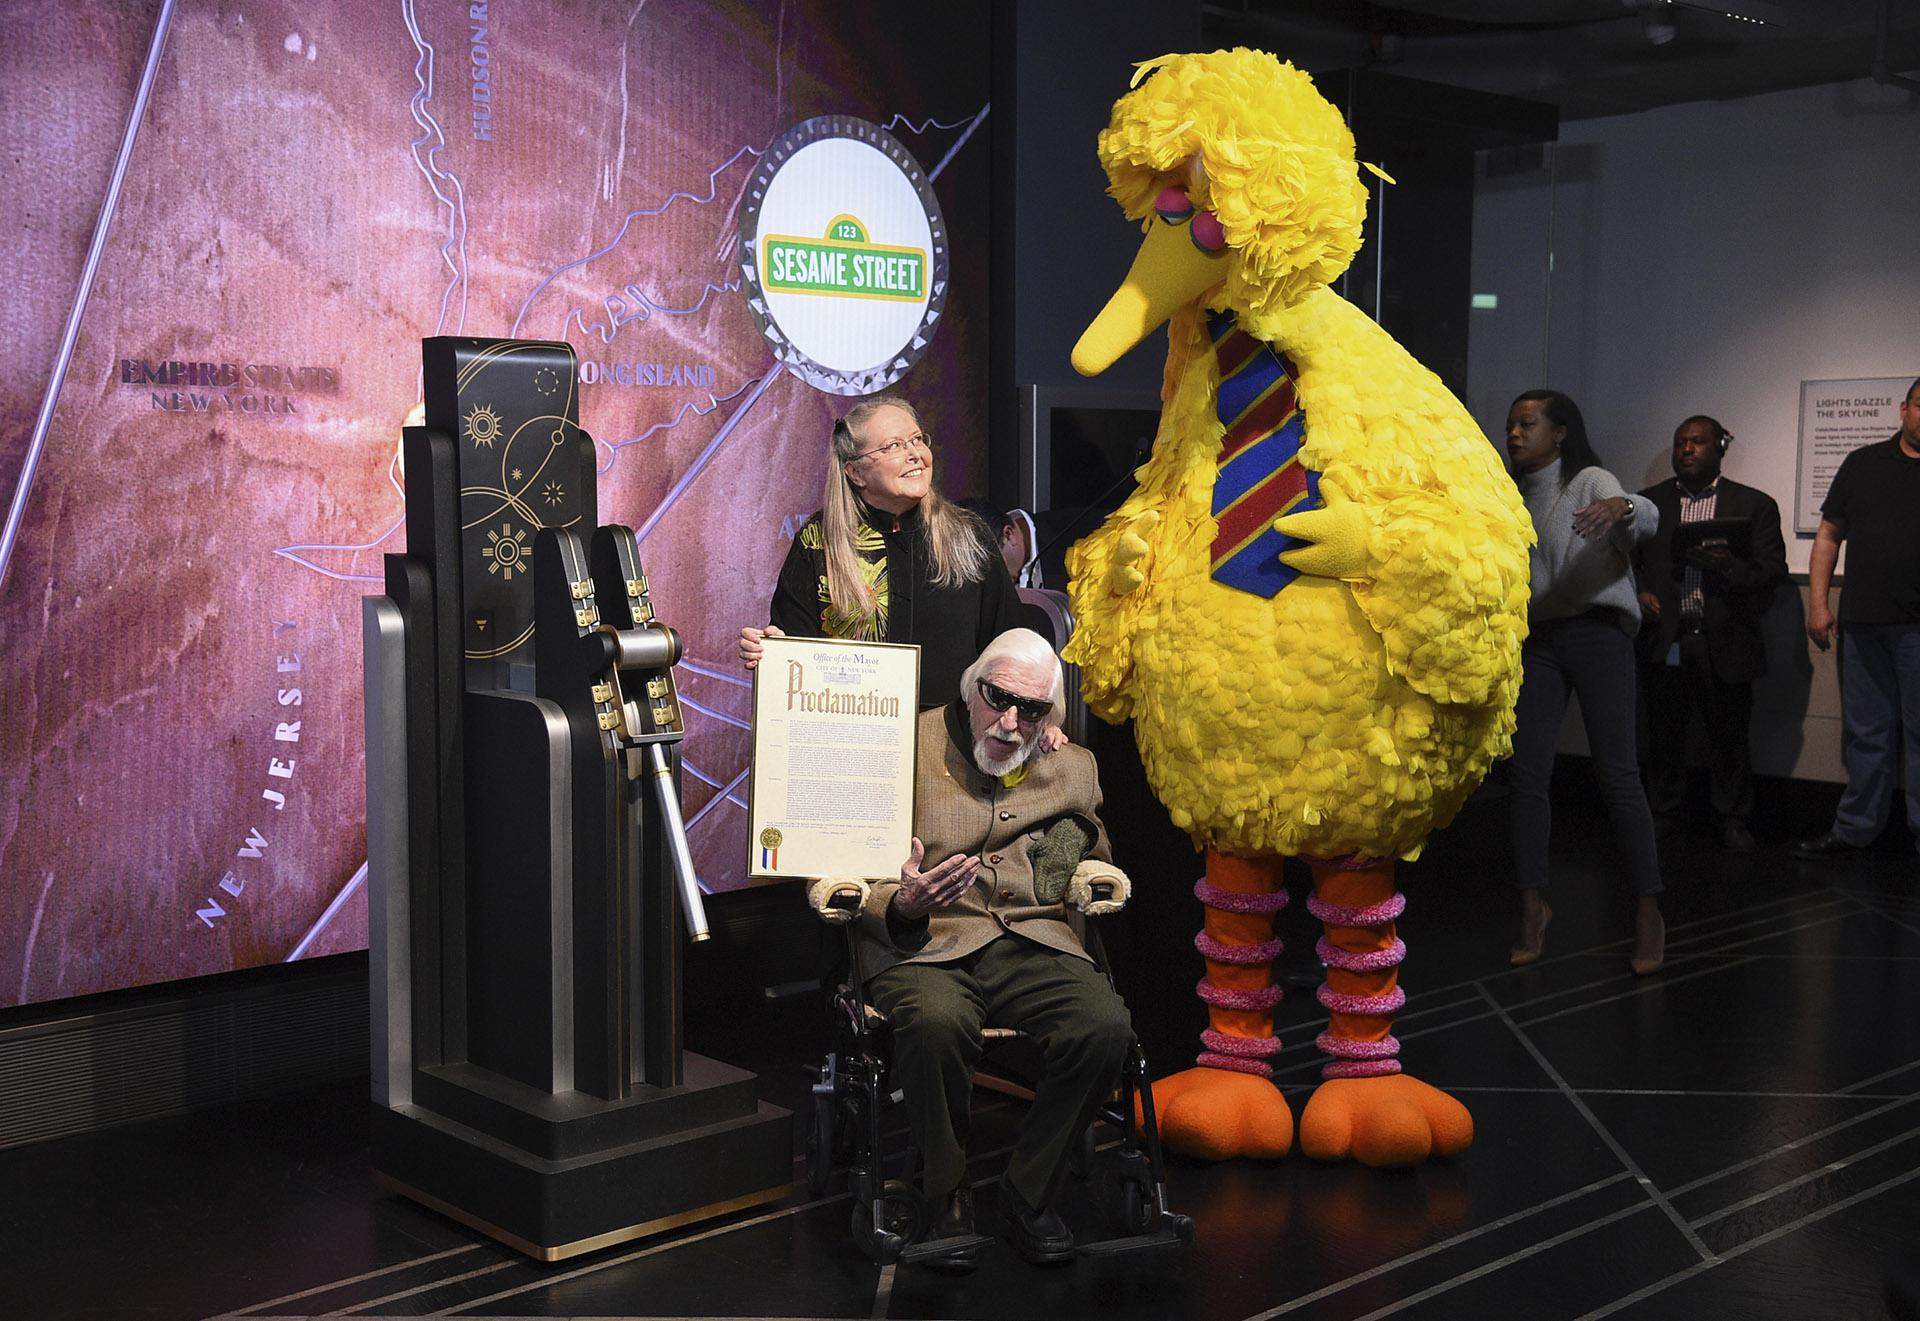 In this Friday, Nov. 8, 2019, file photo, Sesame Street’s Big Bird and puppeteer Caroll Spinney participate in the ceremonial lighting of the Empire State Building in honor of Sesame Street’s 50th anniversary in New York. (Photo by Evan Agostini / Invision/AP, File)